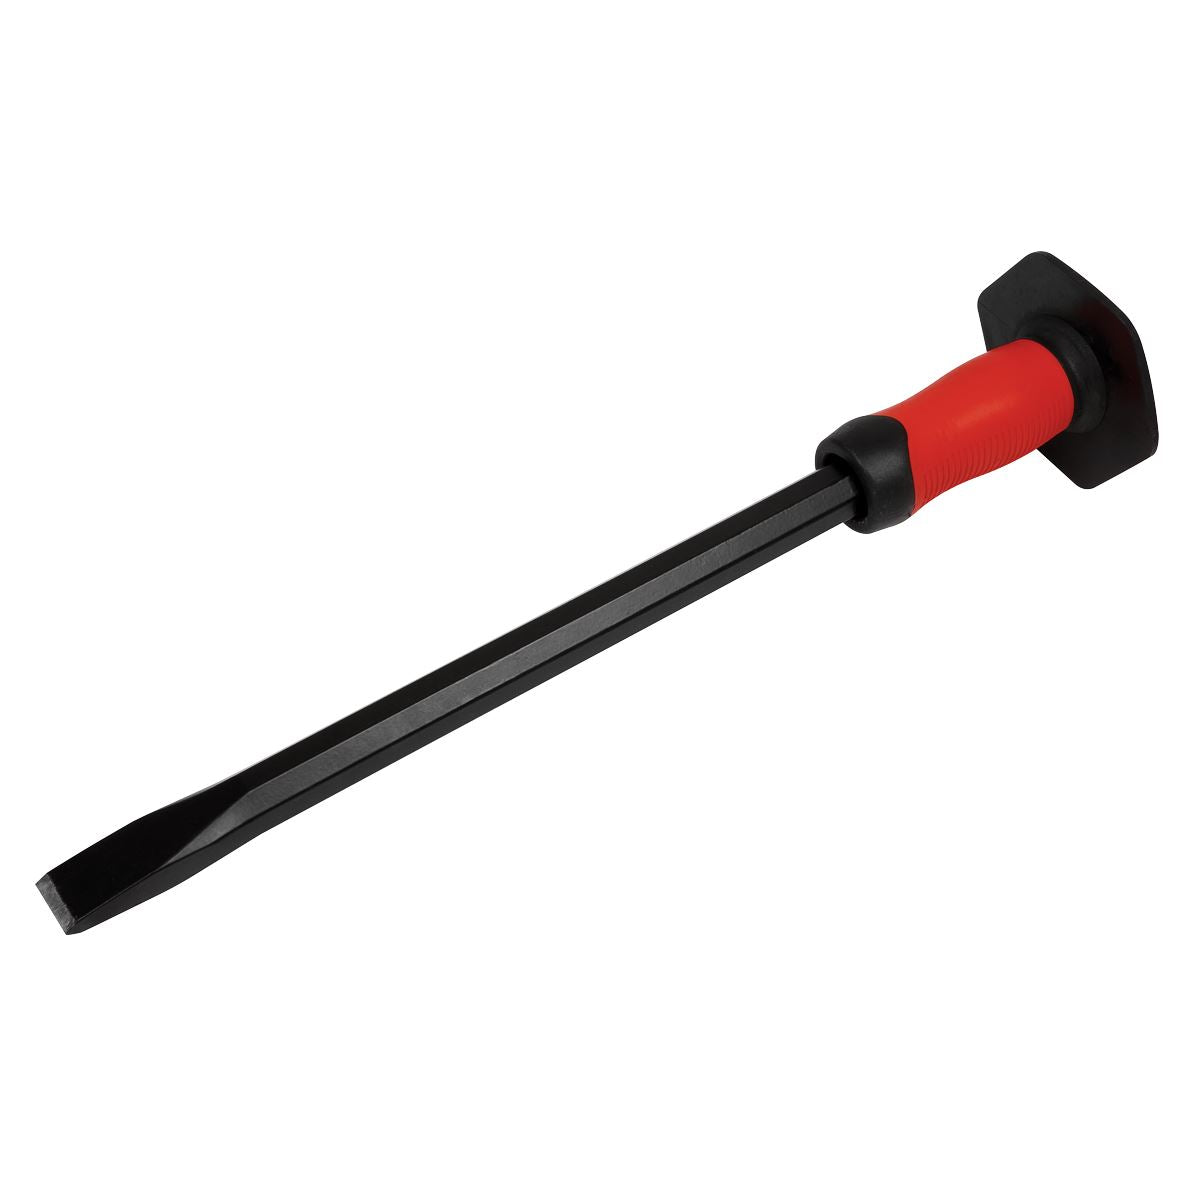 Sealey Cold Chisel With Grip 25 x 450mm